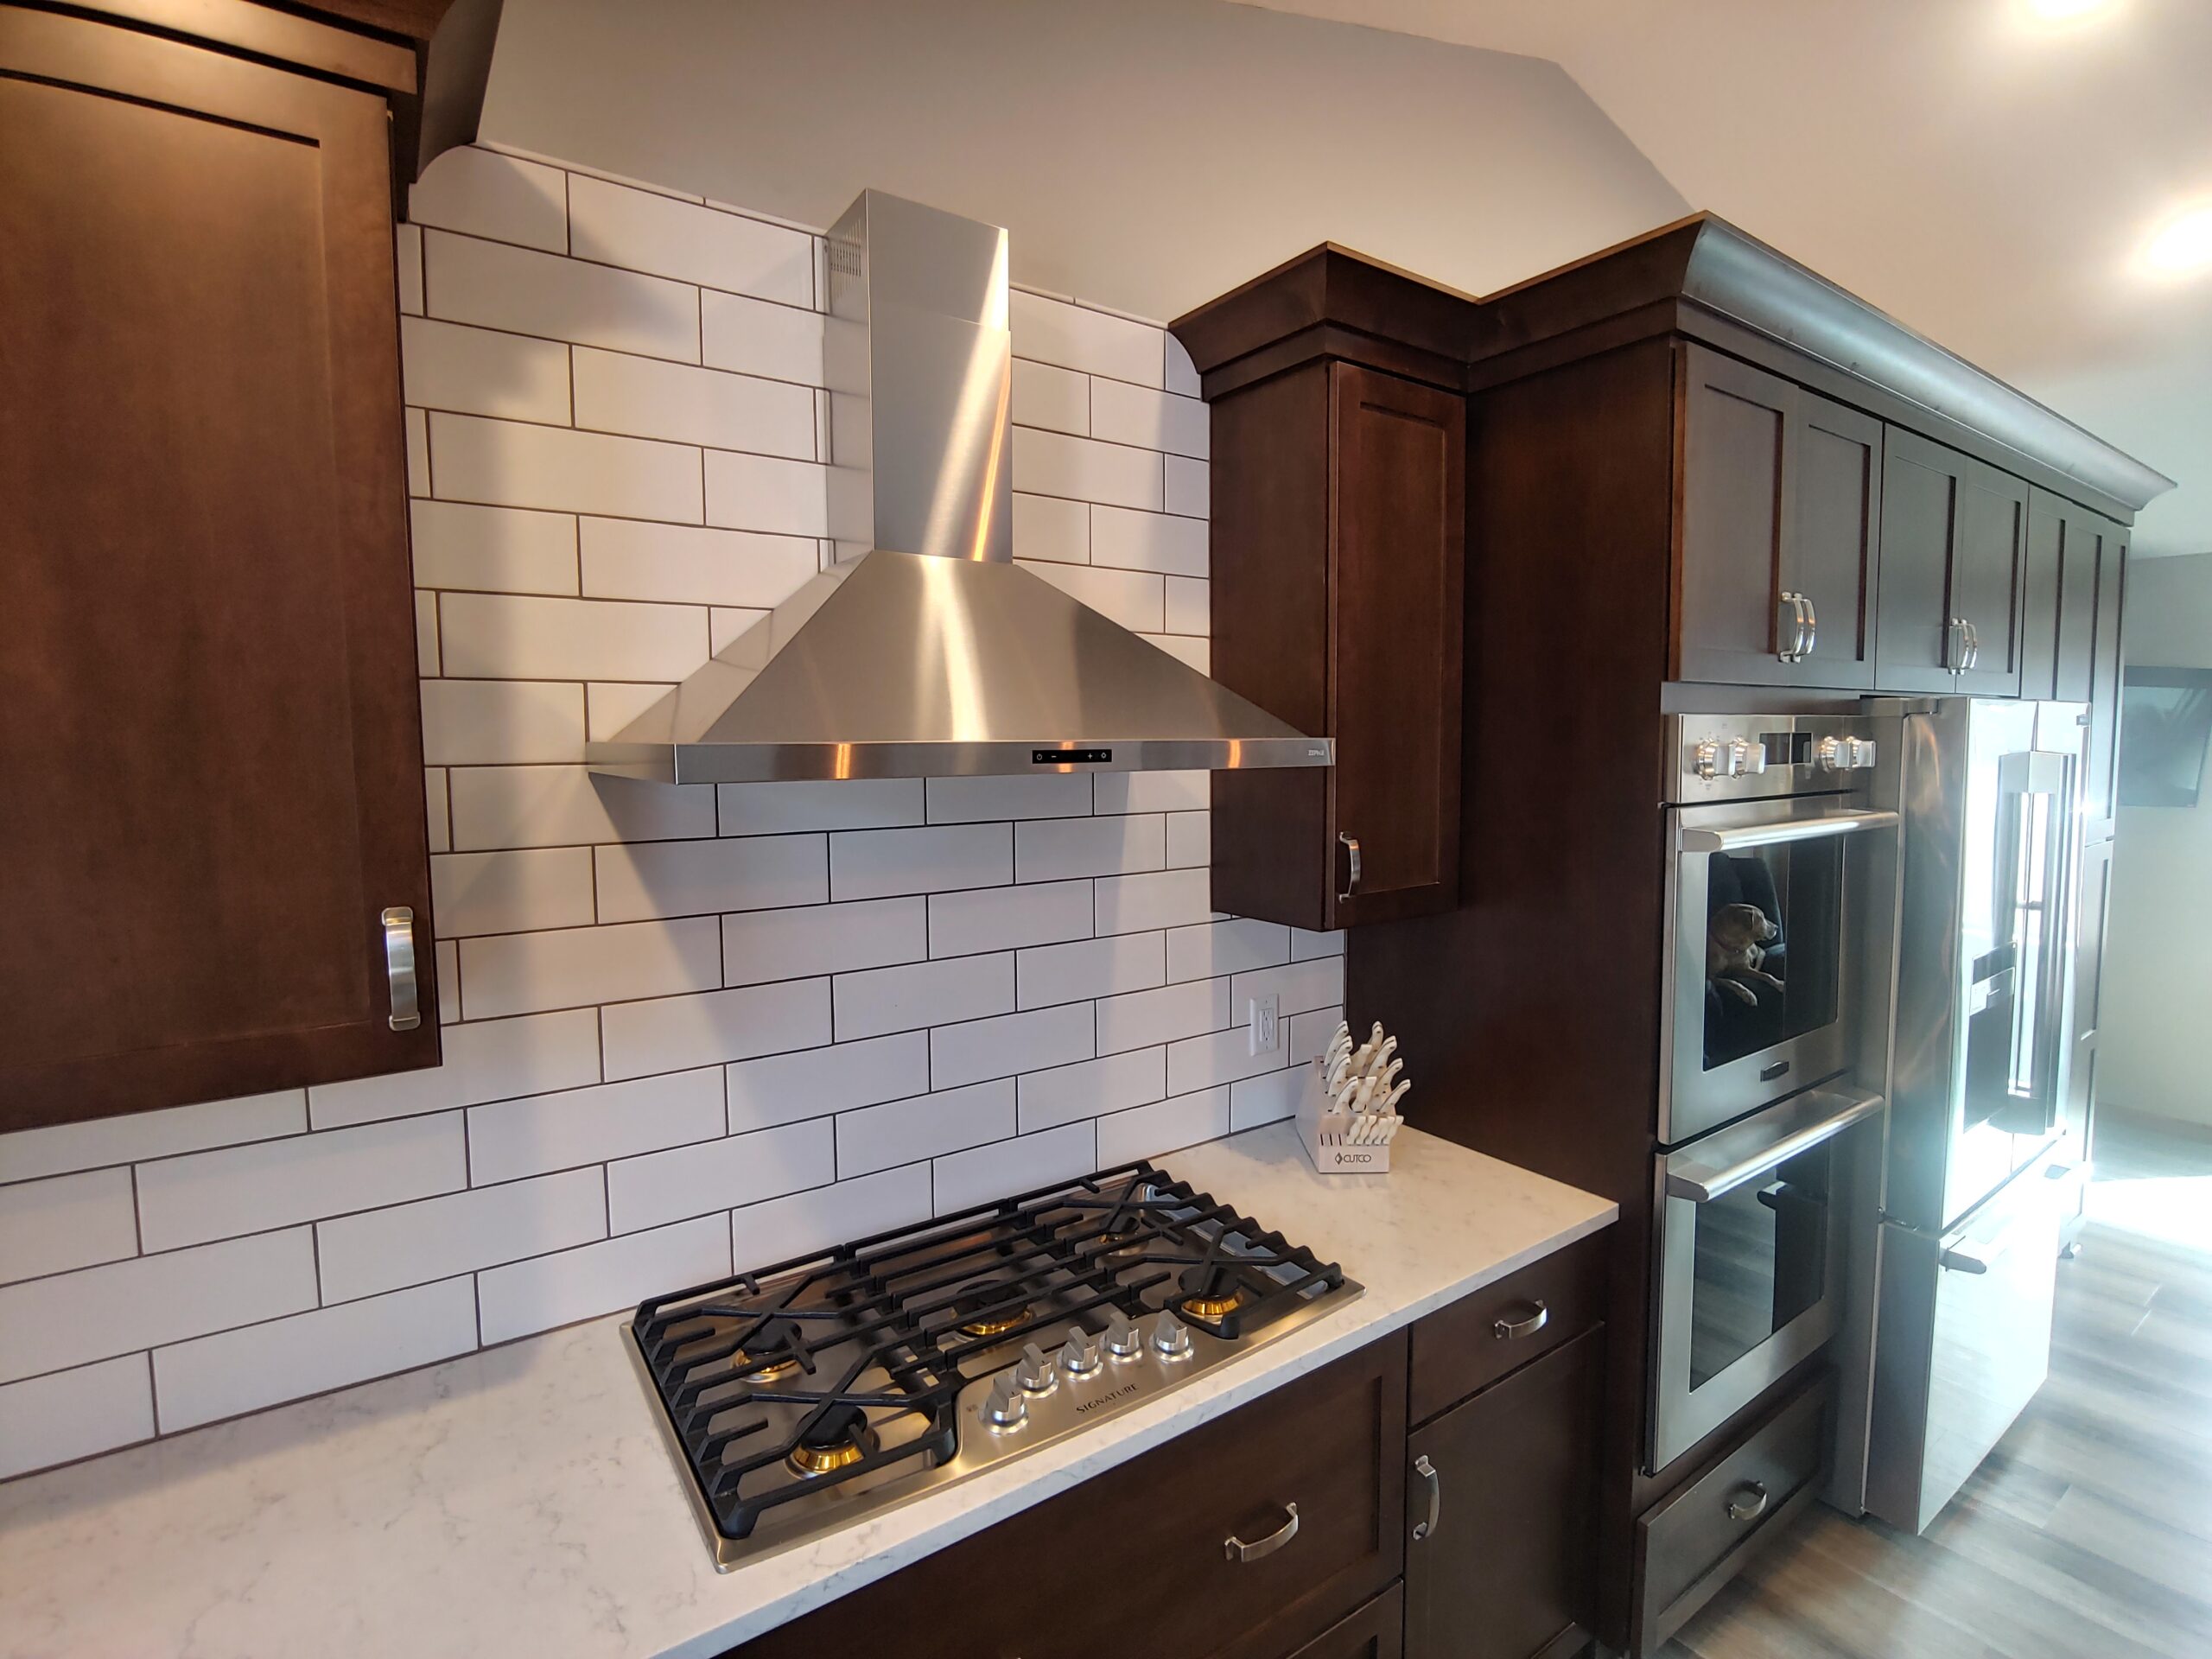 start a kitchen remodeling project today!